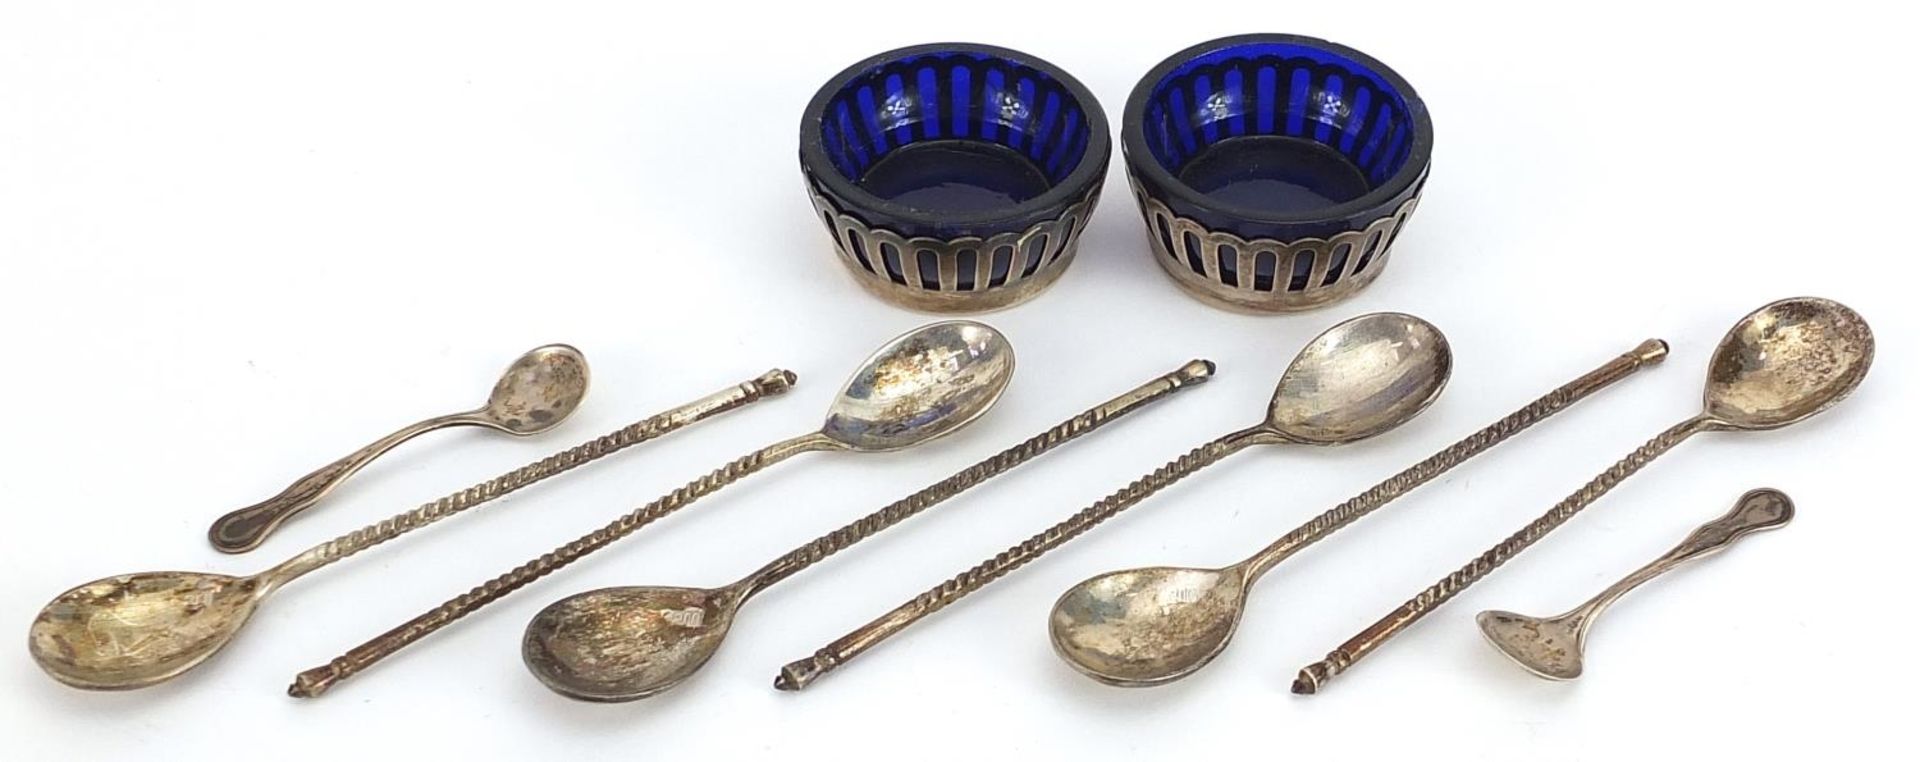 Pair of sterling silver open salts with blue glass liners and spoons and a set of six 800 grade